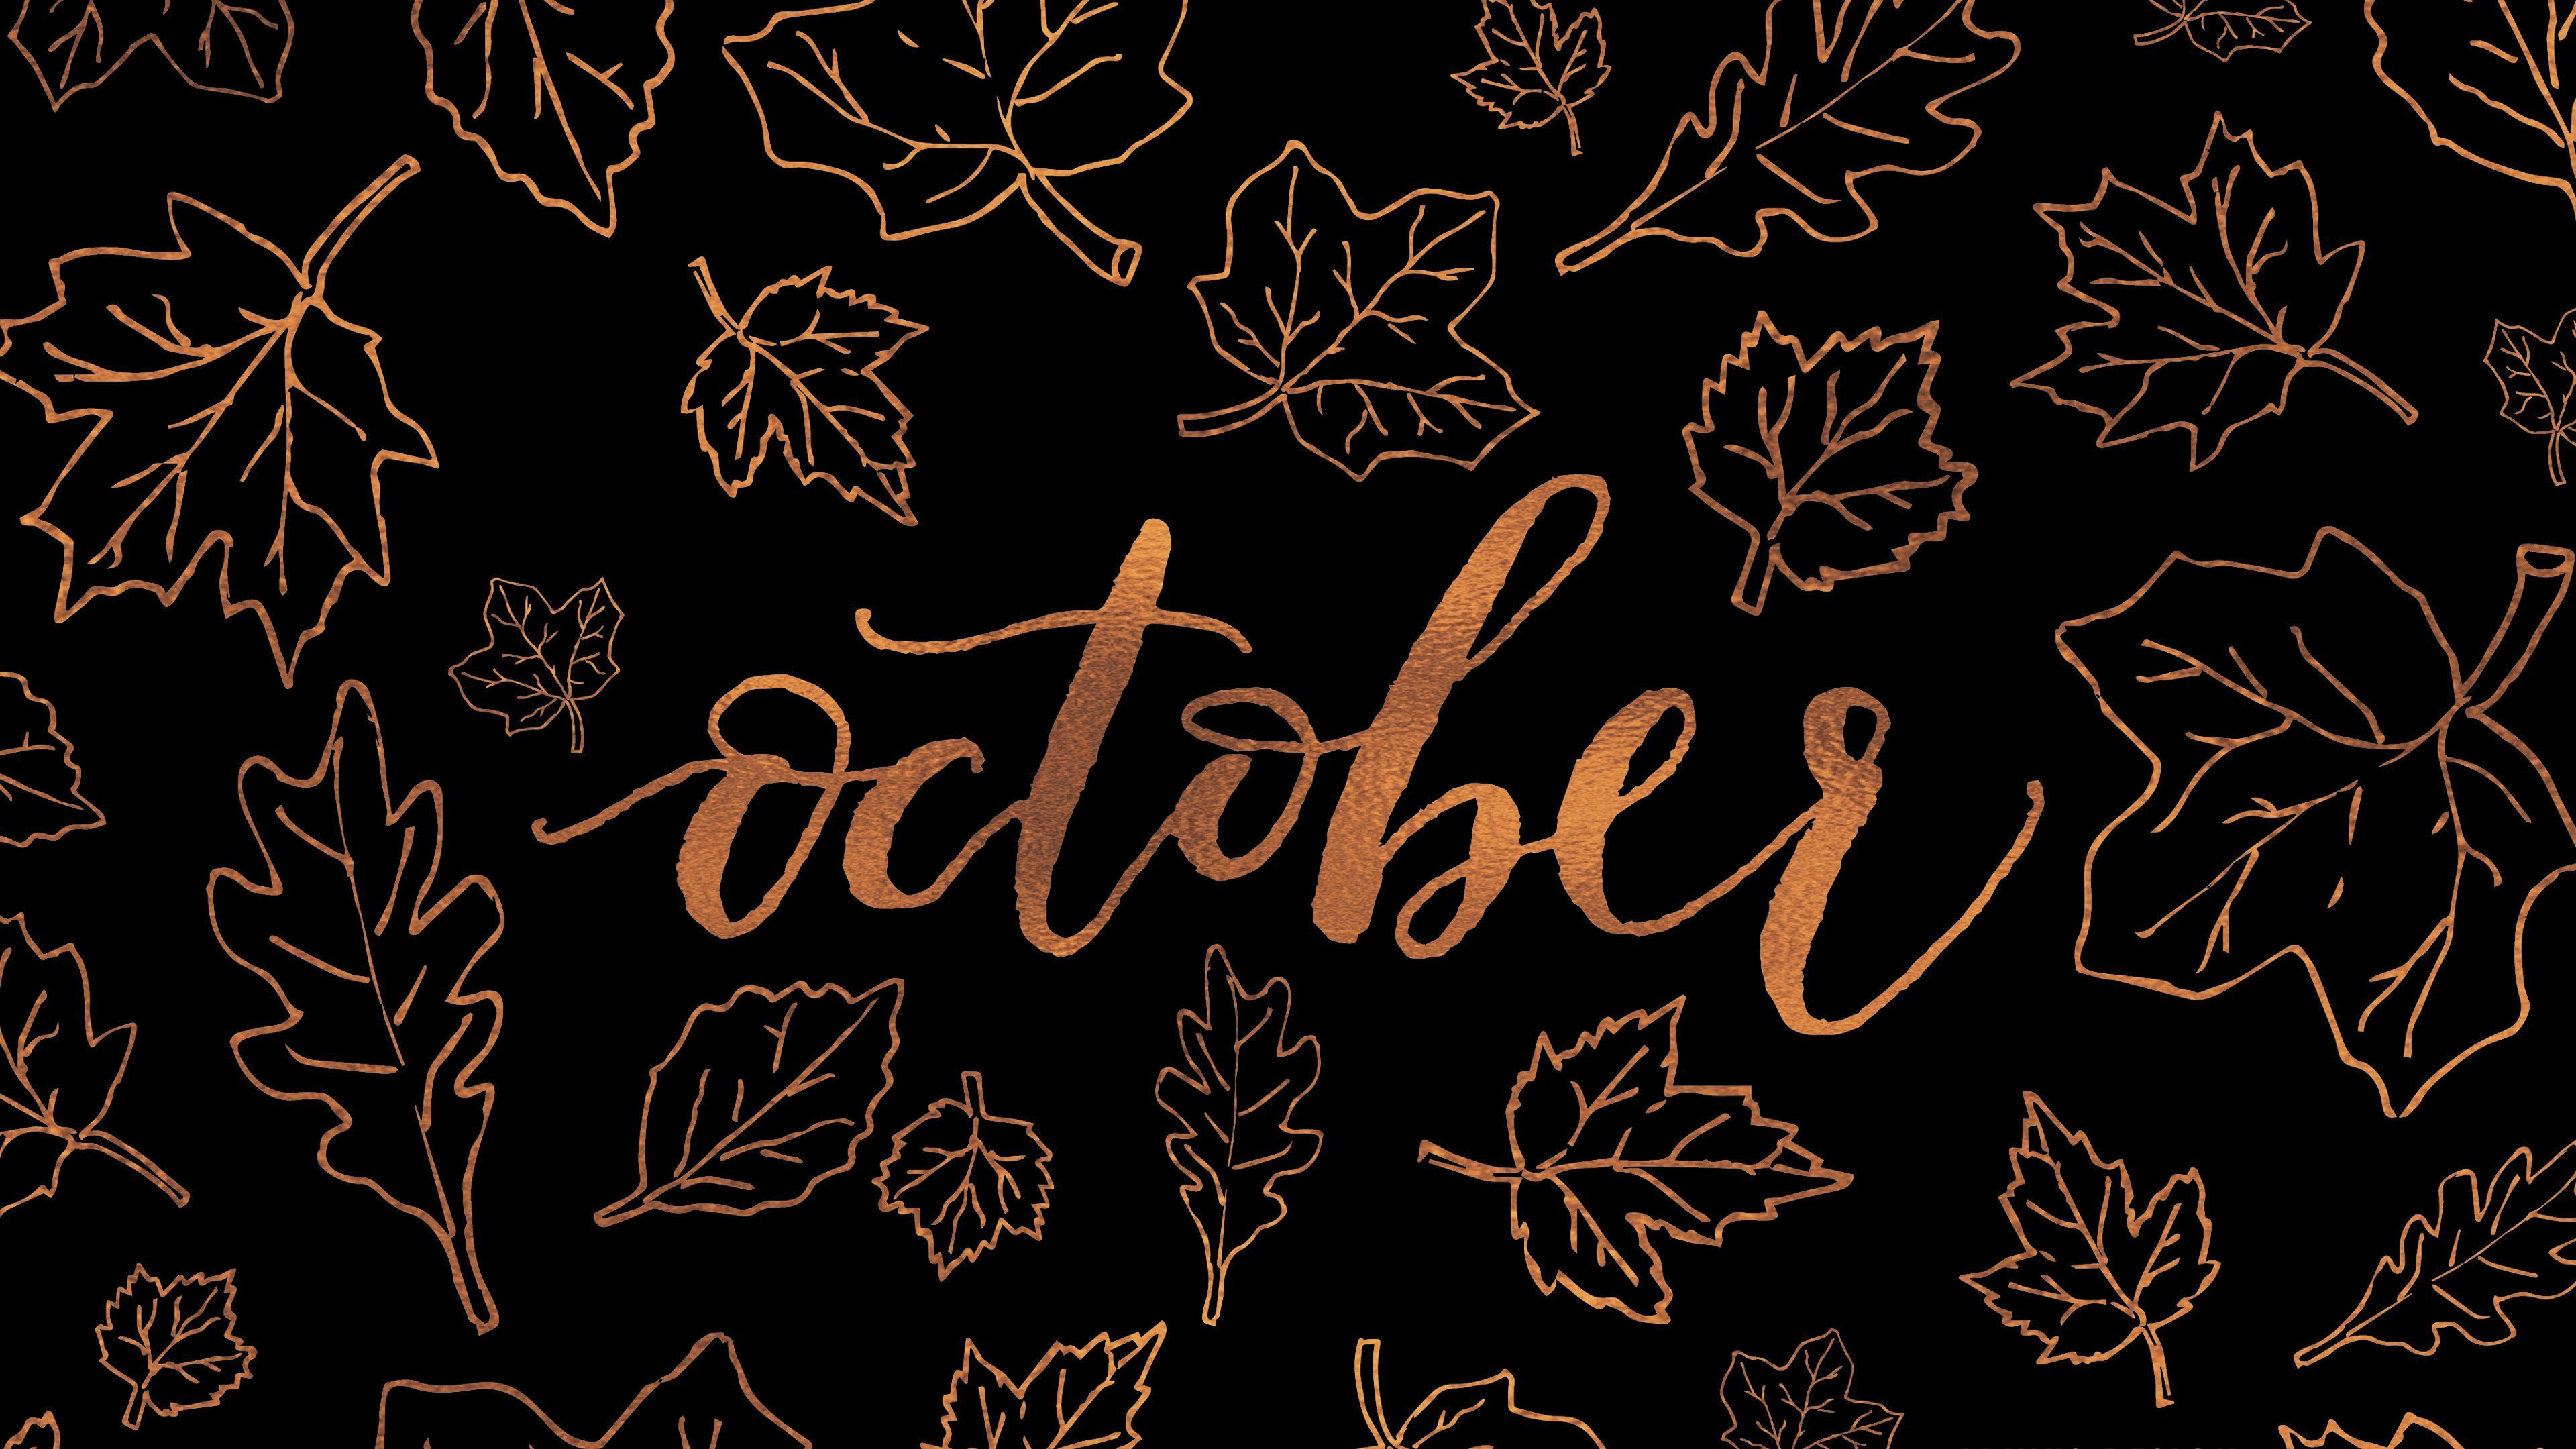 October, the 10th month of the year, is named after the Latin word octo, which means eight. - October